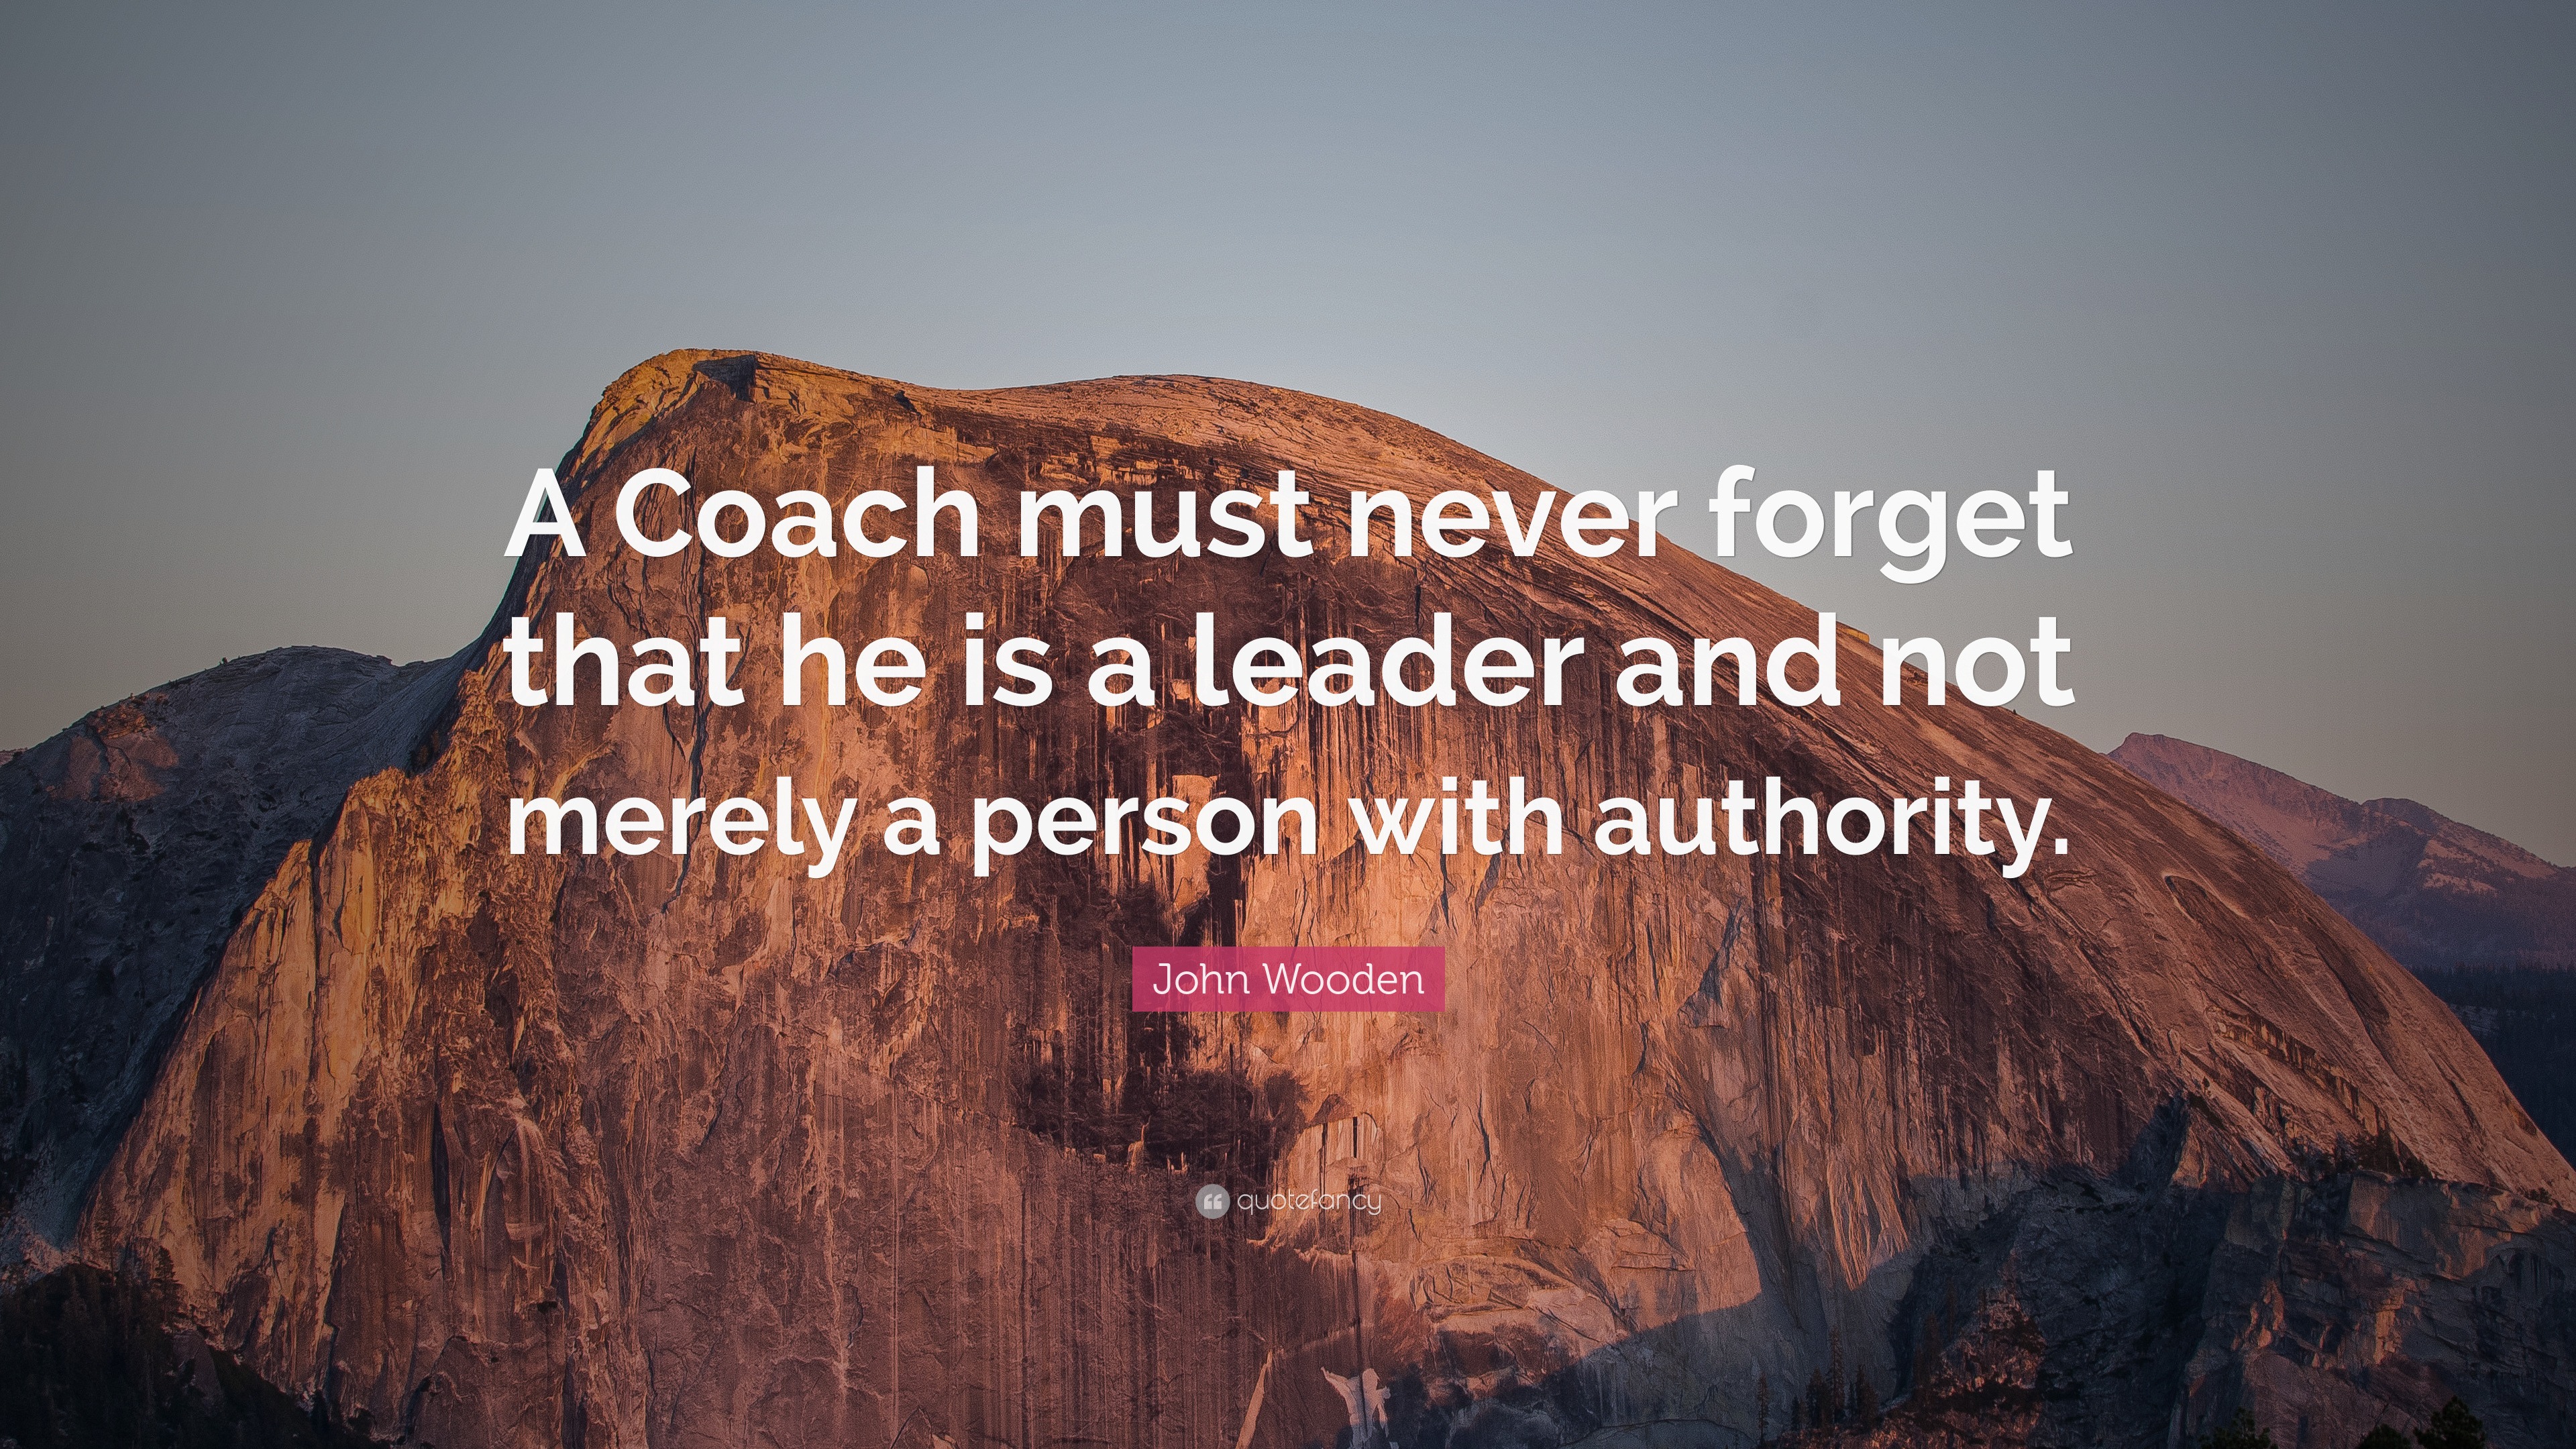 John Wooden Quote: “A Coach must never forget that he is a leader and